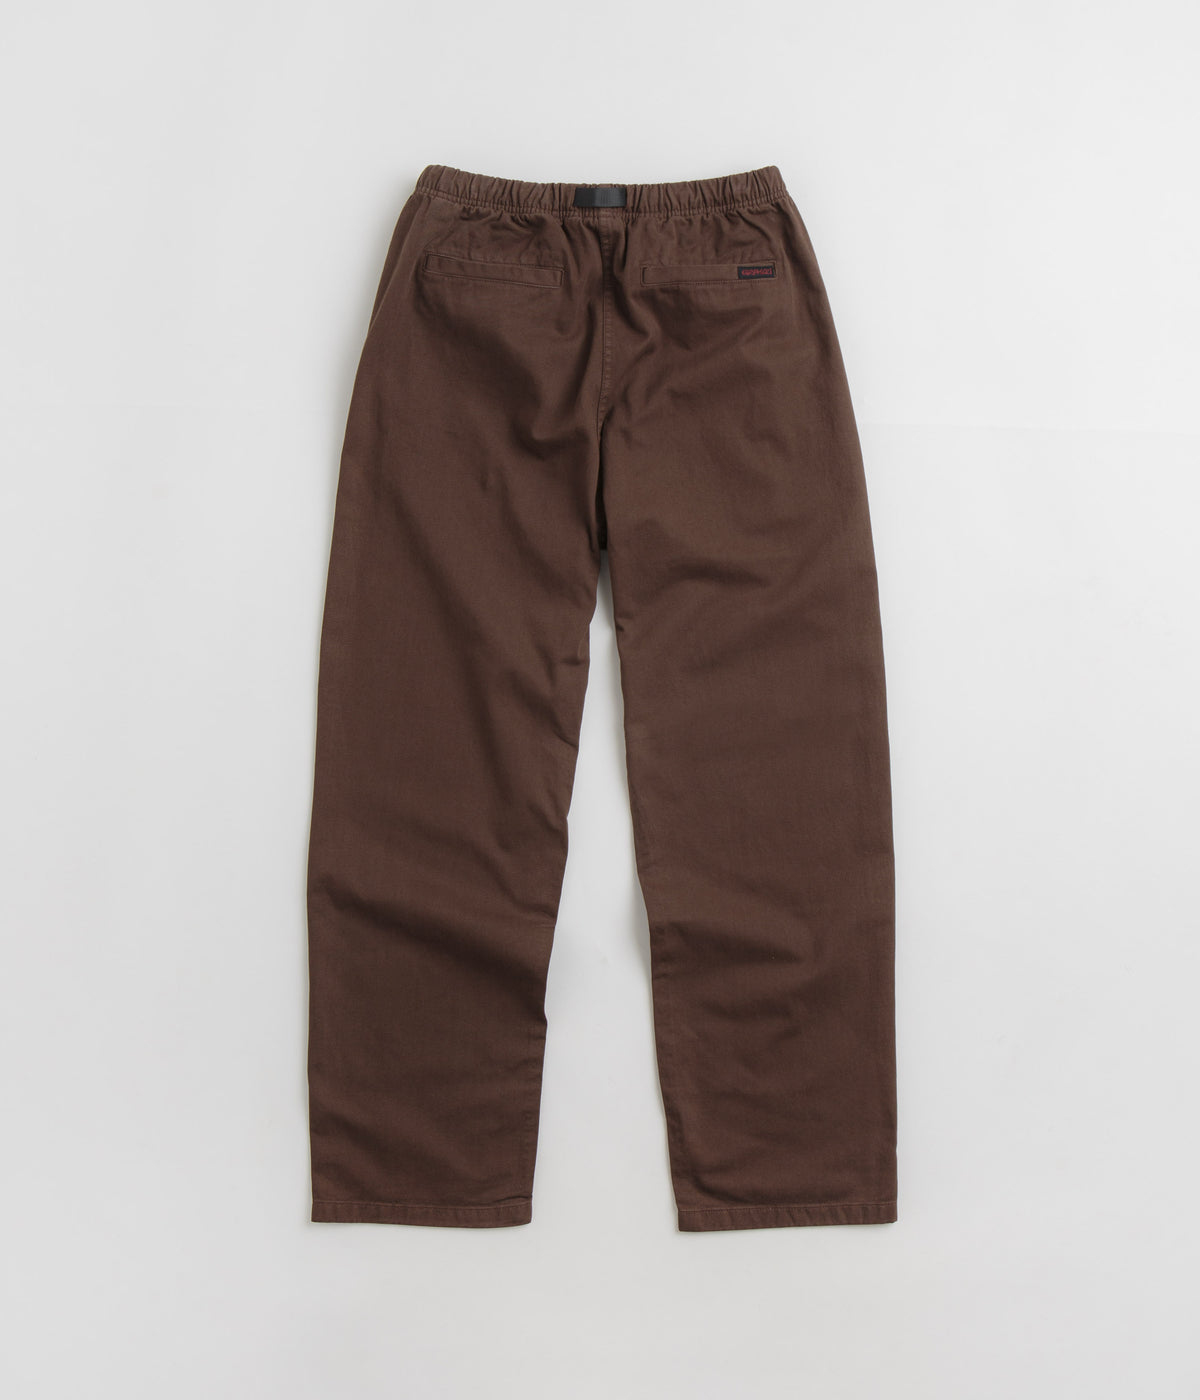 Gramicci Original G Pants Olive Always In Colour, 45% OFF